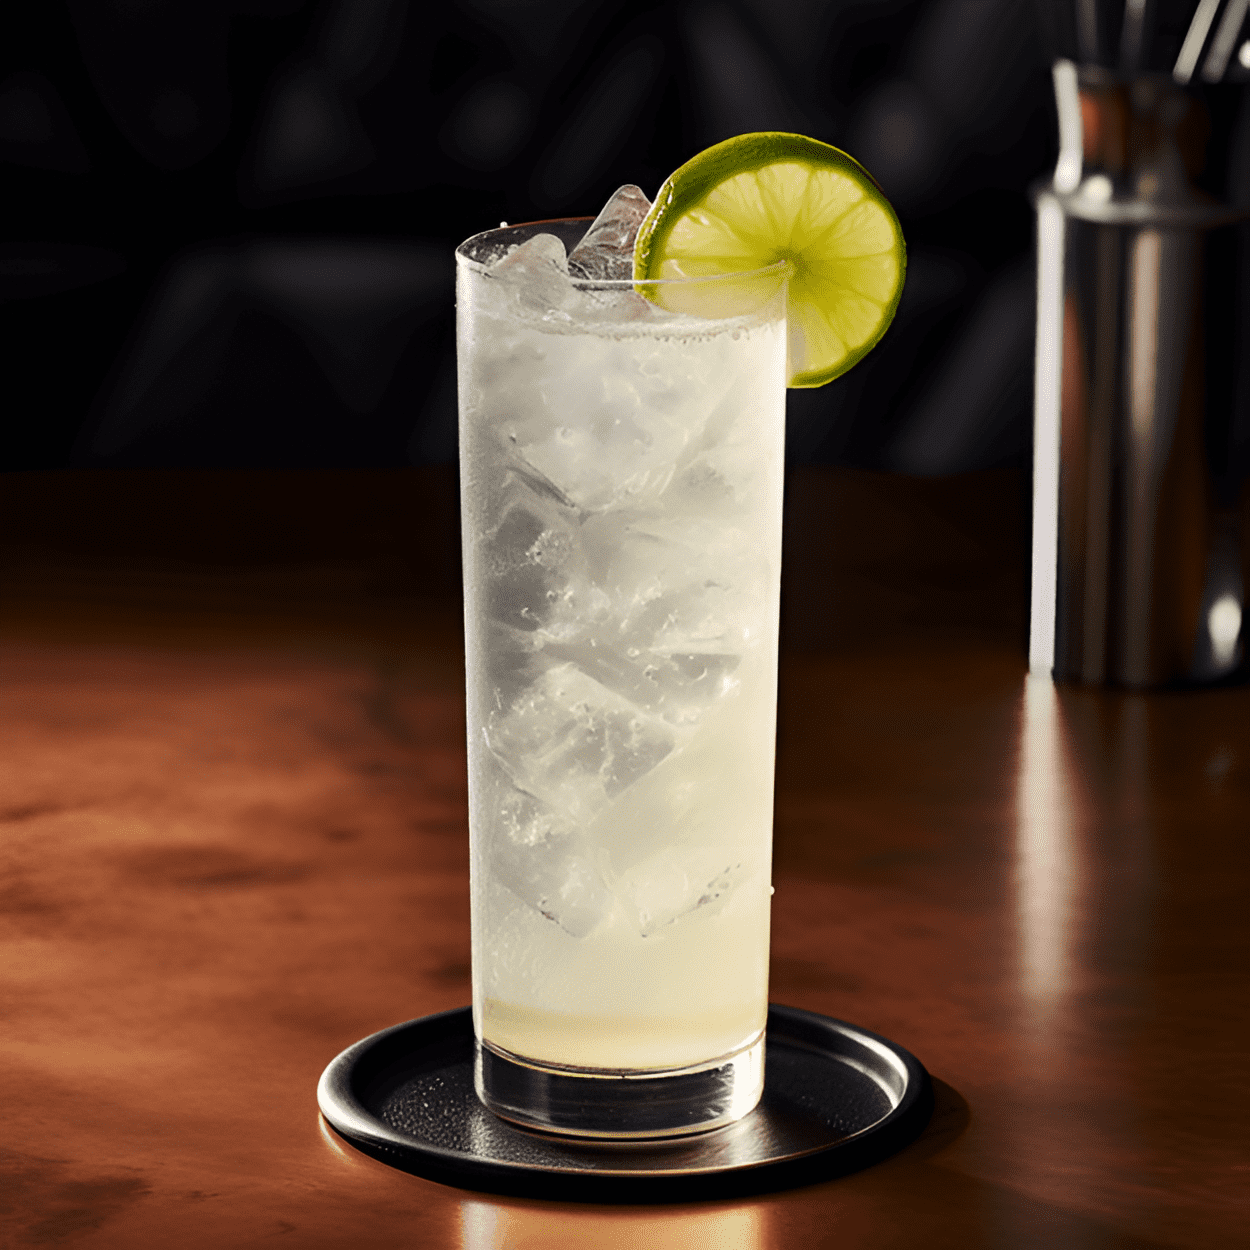 Springwater Cocktail Recipe - The Springwater cocktail is a light, refreshing drink with a hint of sweetness. The citrus notes from the lemon juice balance out the sweetness of the honey, while the gin adds a subtle kick. The addition of sparkling water gives it a bubbly, refreshing finish.